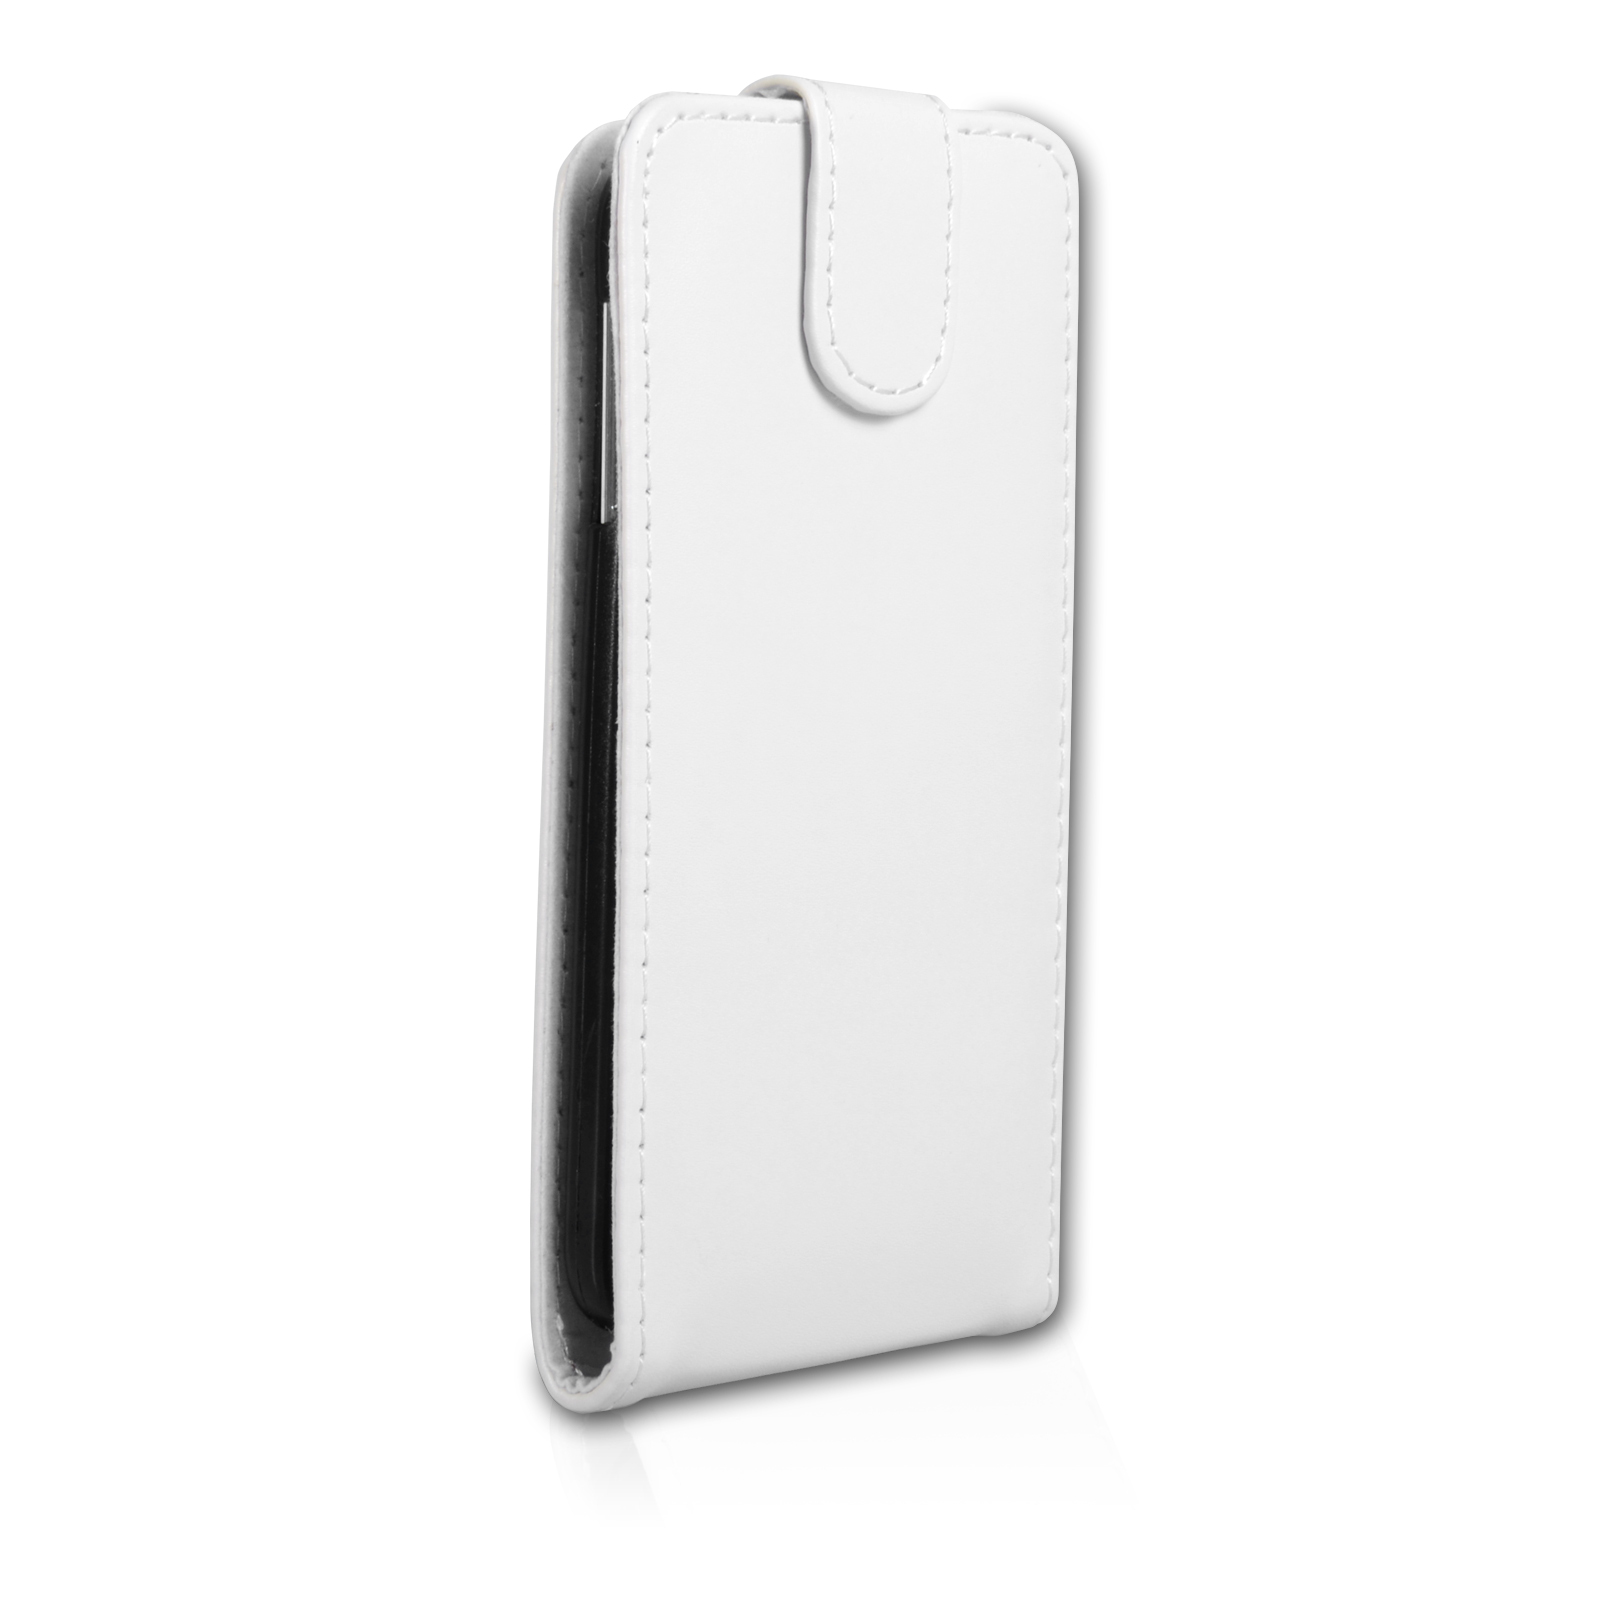 YouSave Accessories Samsung Galaxy S5 Leather-Effect Flip Case - White